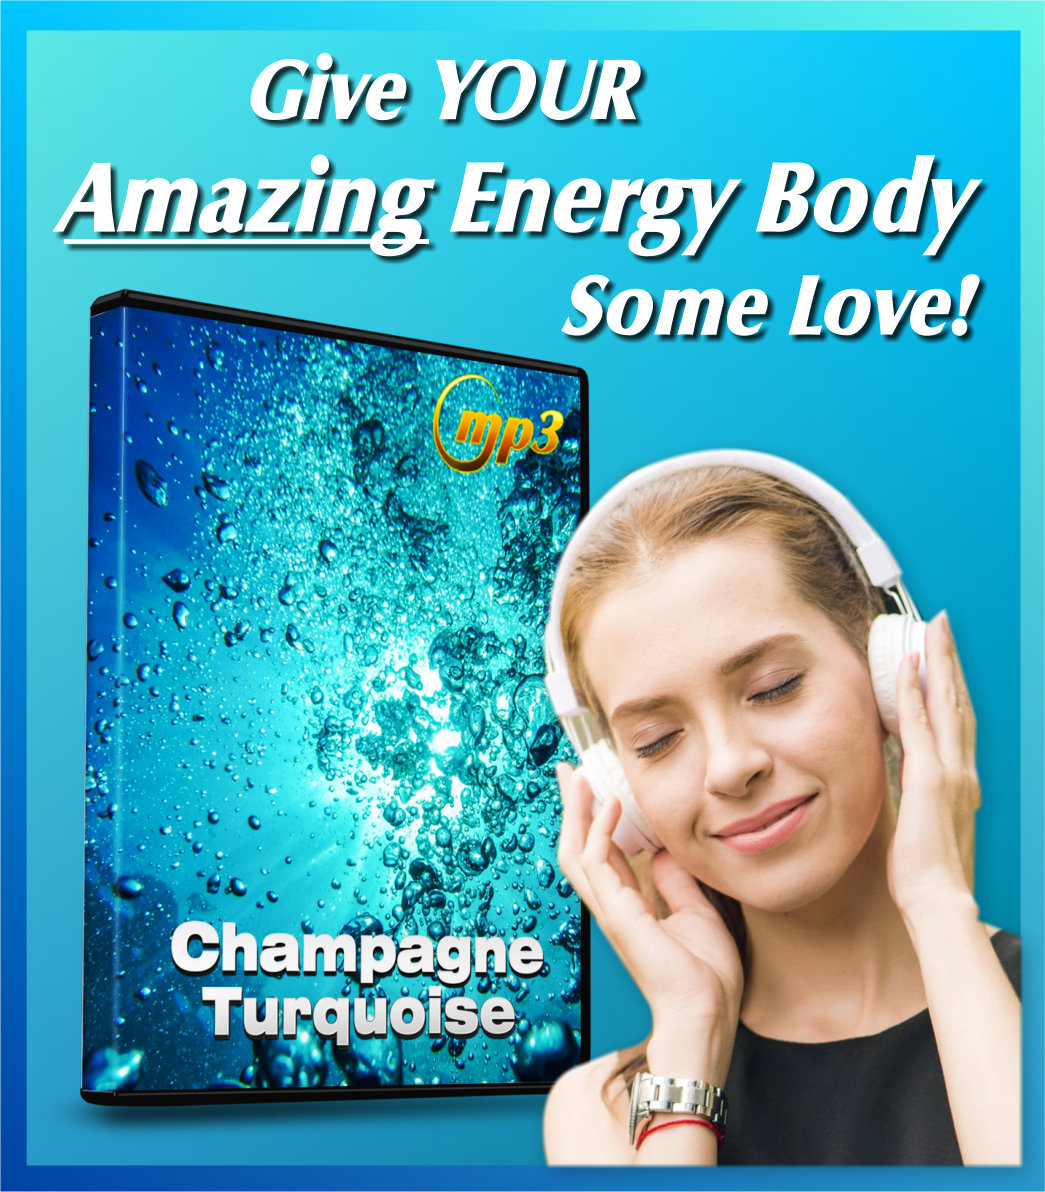 Lovely lady delightedly immersed in listening to champagne turquoise